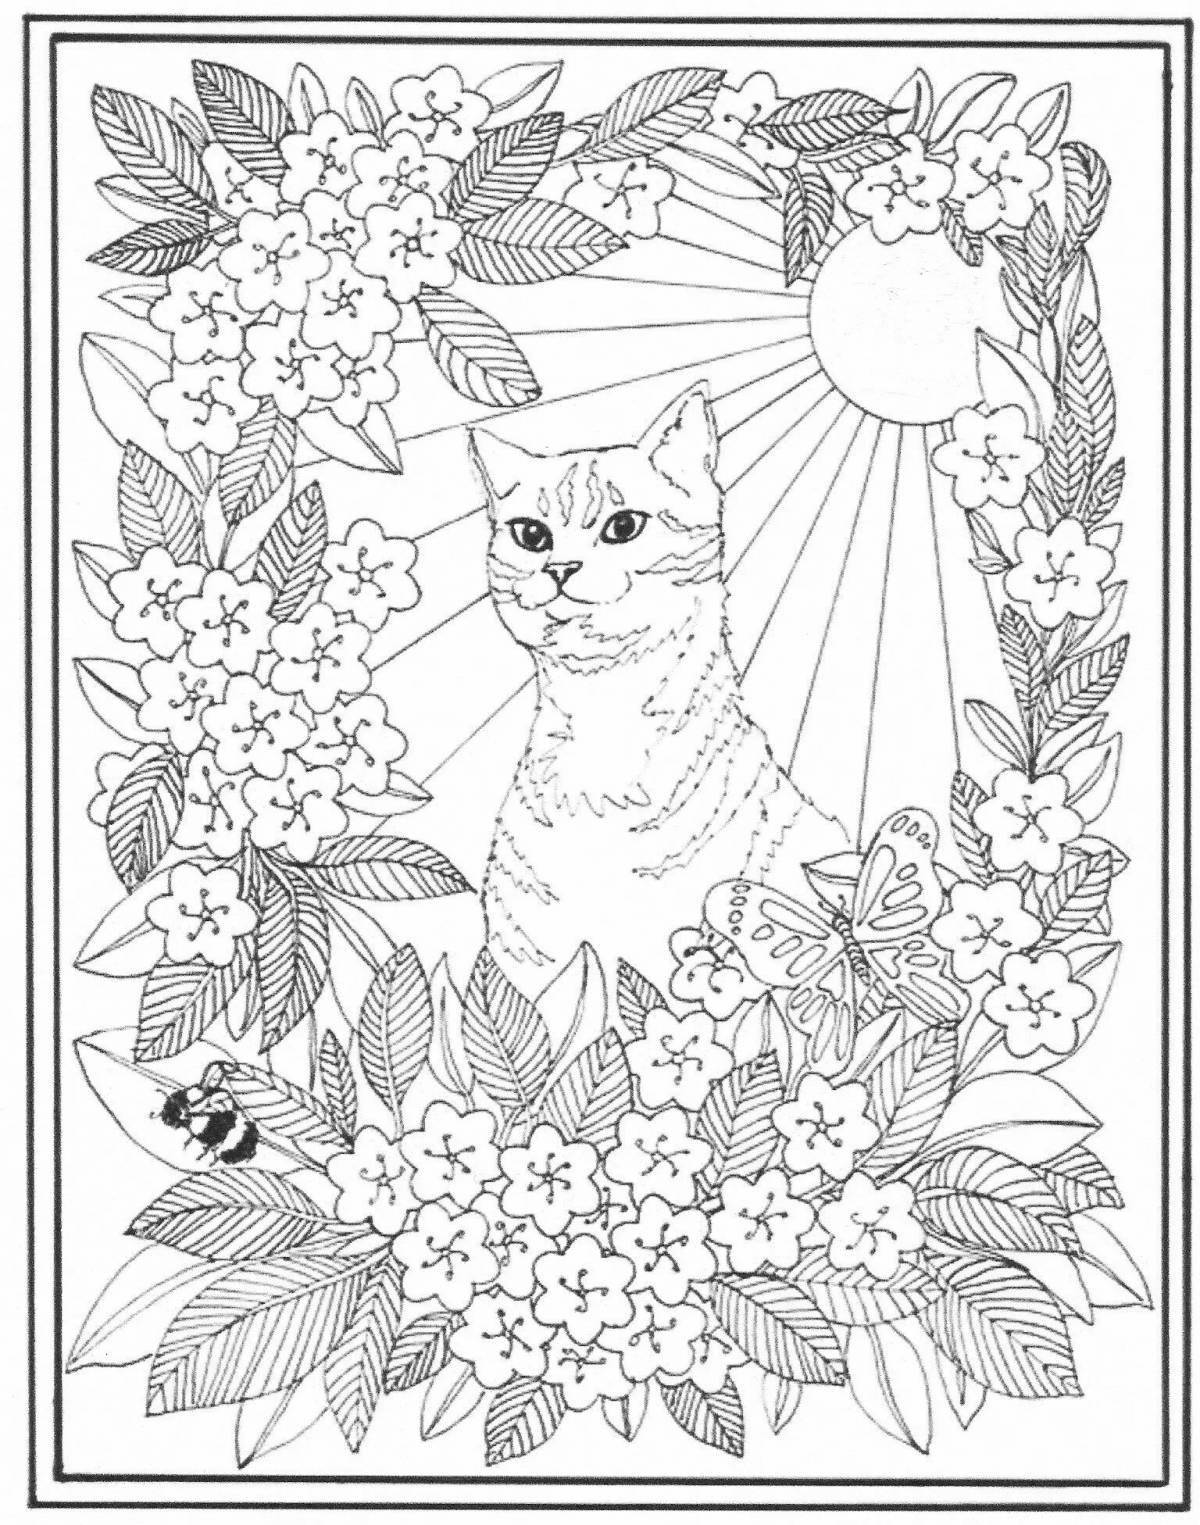 Graceful cat with flowers